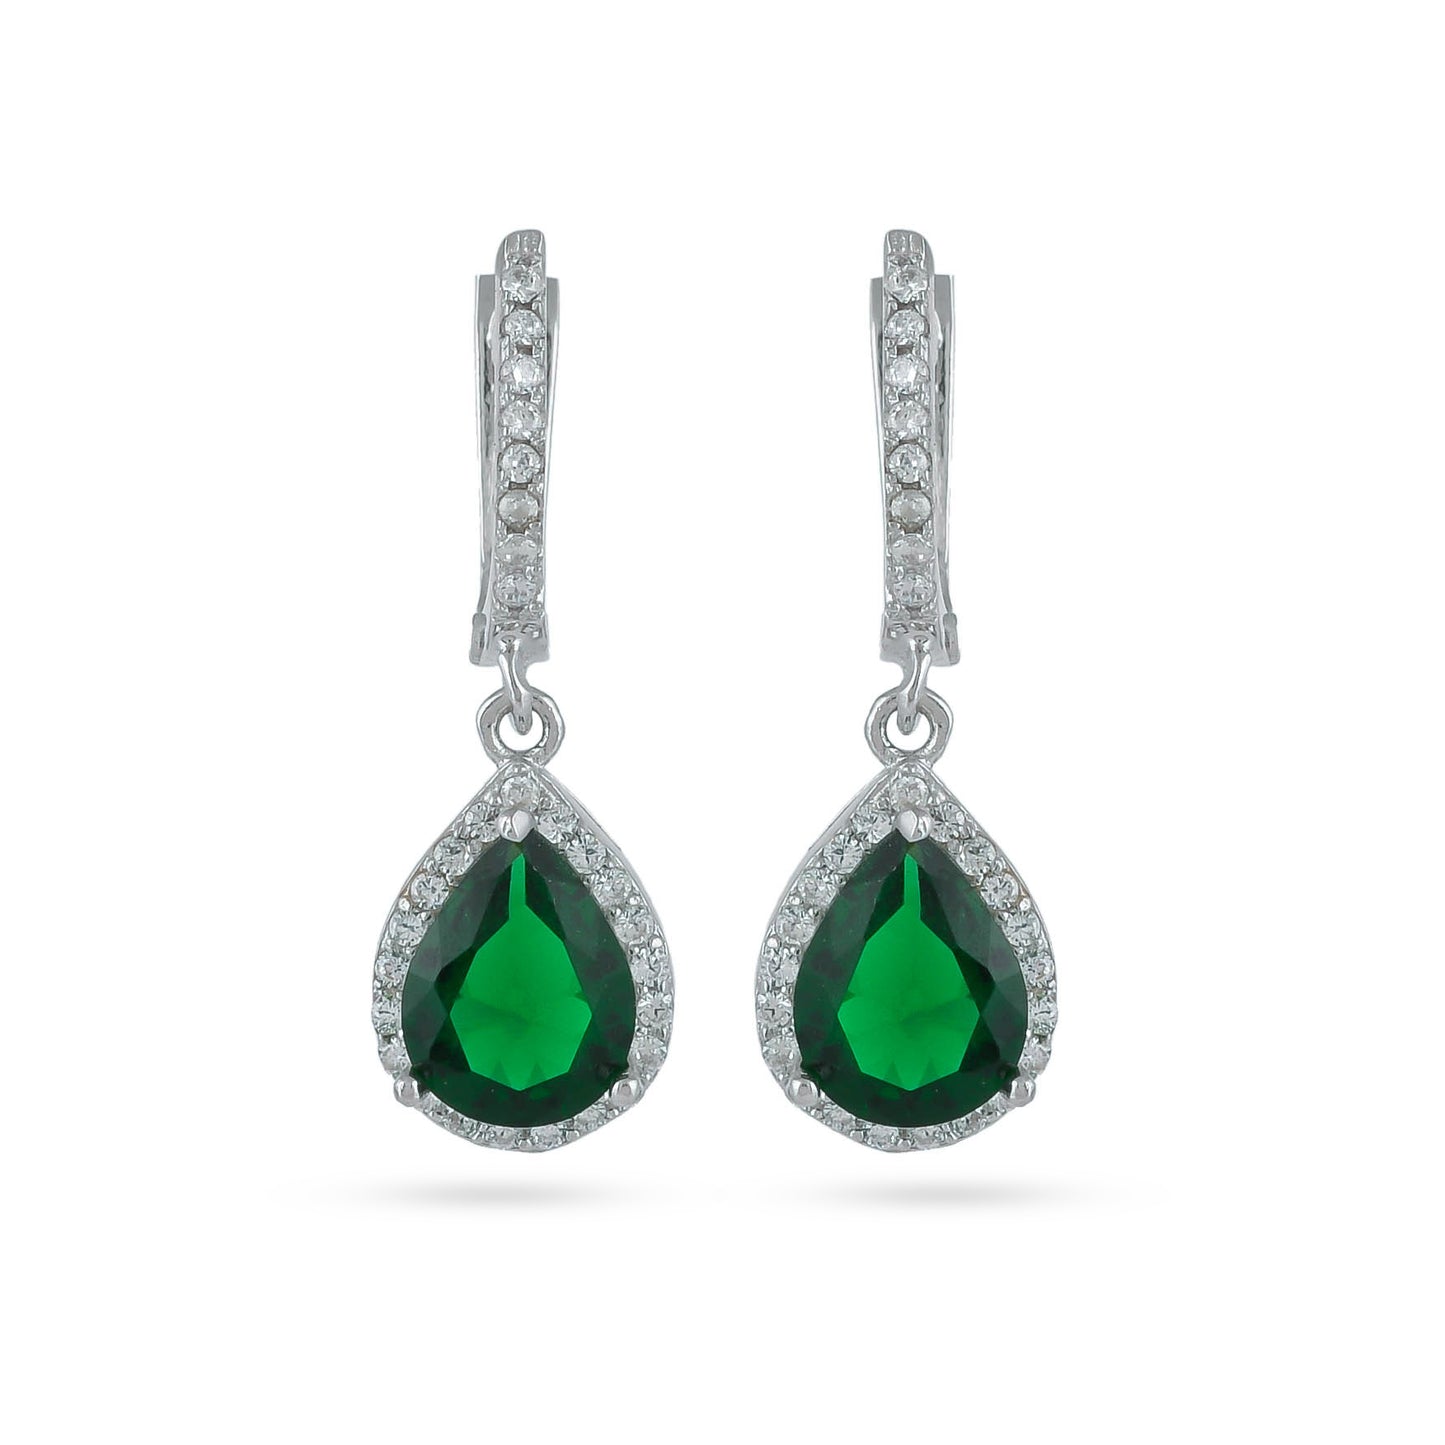 Green Cz Silver Drop Earring - From Purl Purl